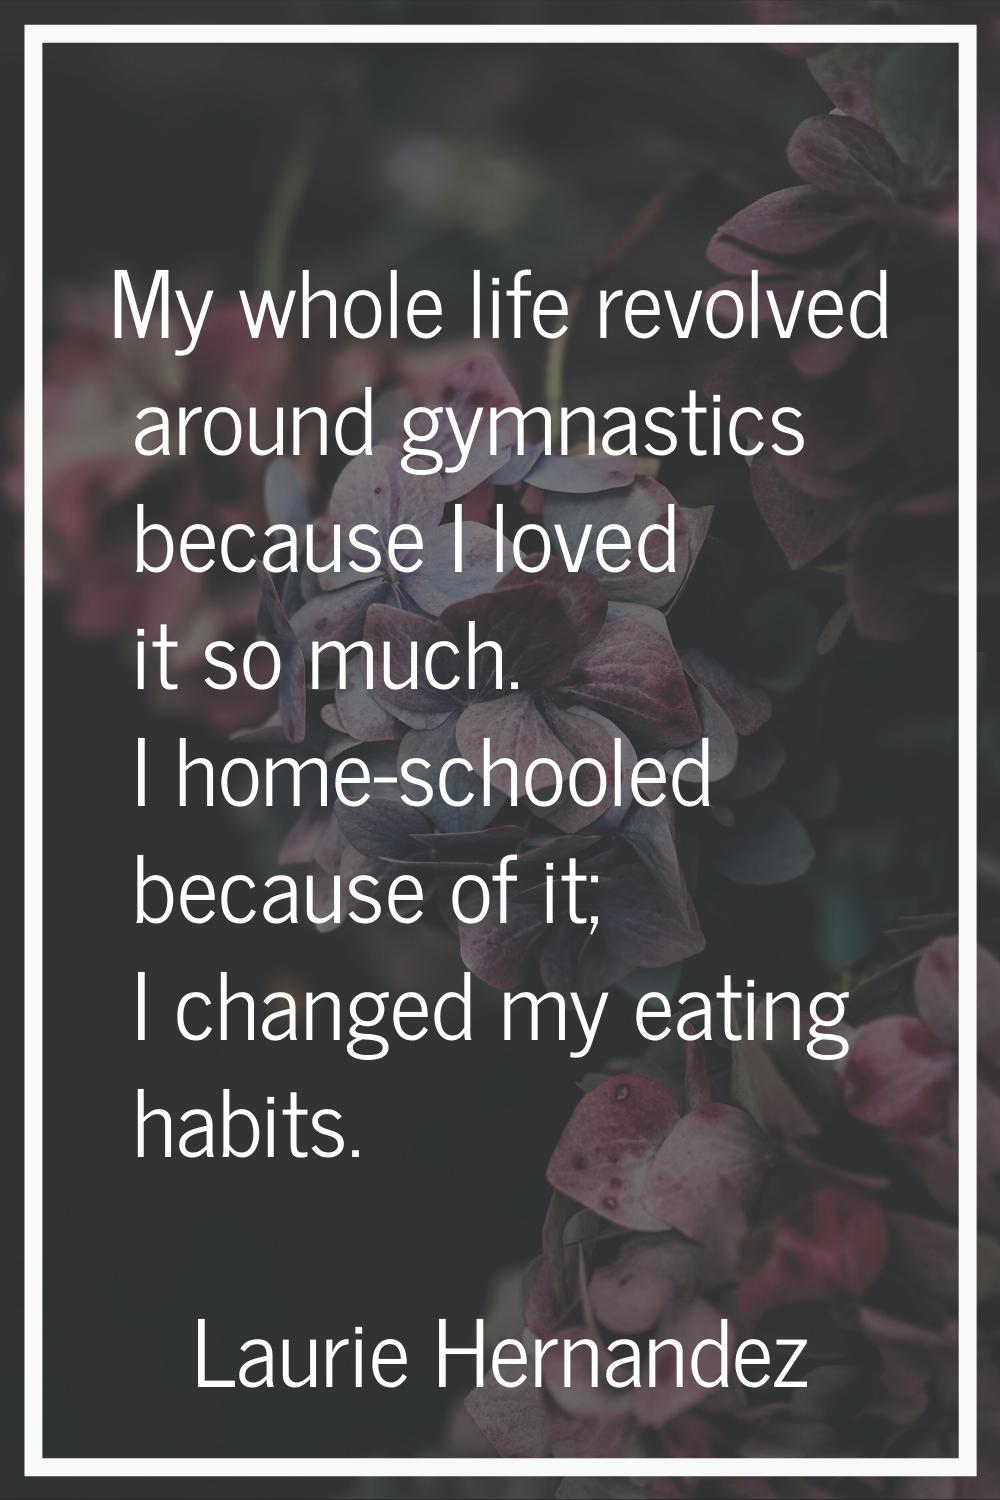 My whole life revolved around gymnastics because I loved it so much. I home-schooled because of it;